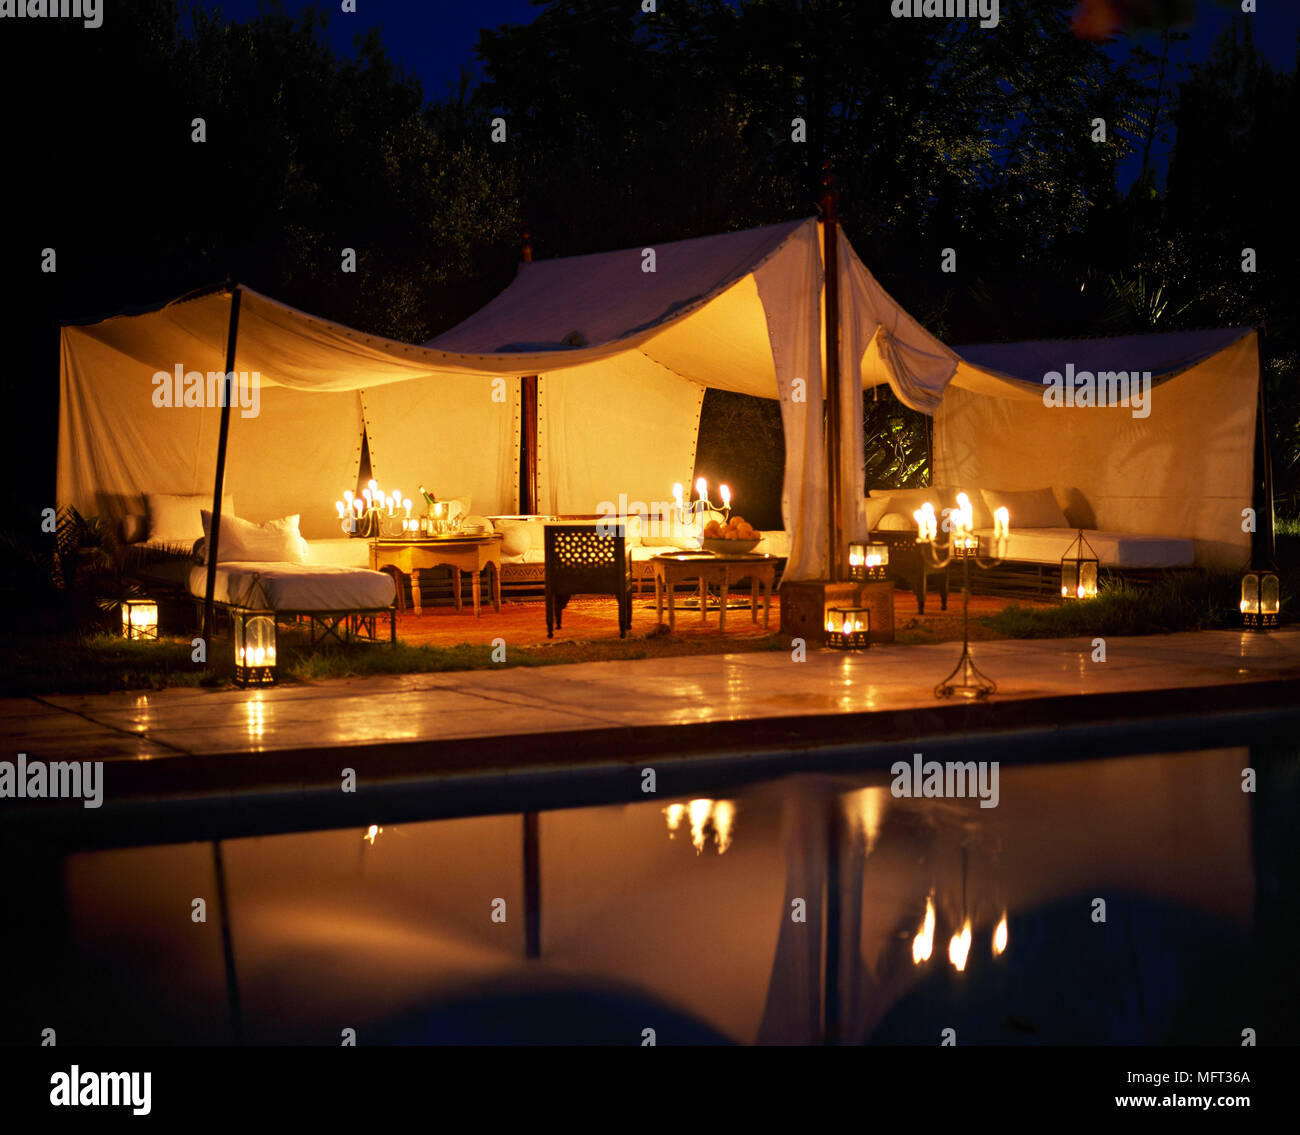 Moroccan hotel outdoor entertaining lit marquee at night by pool lanterns     outdoors pools Stock Photo